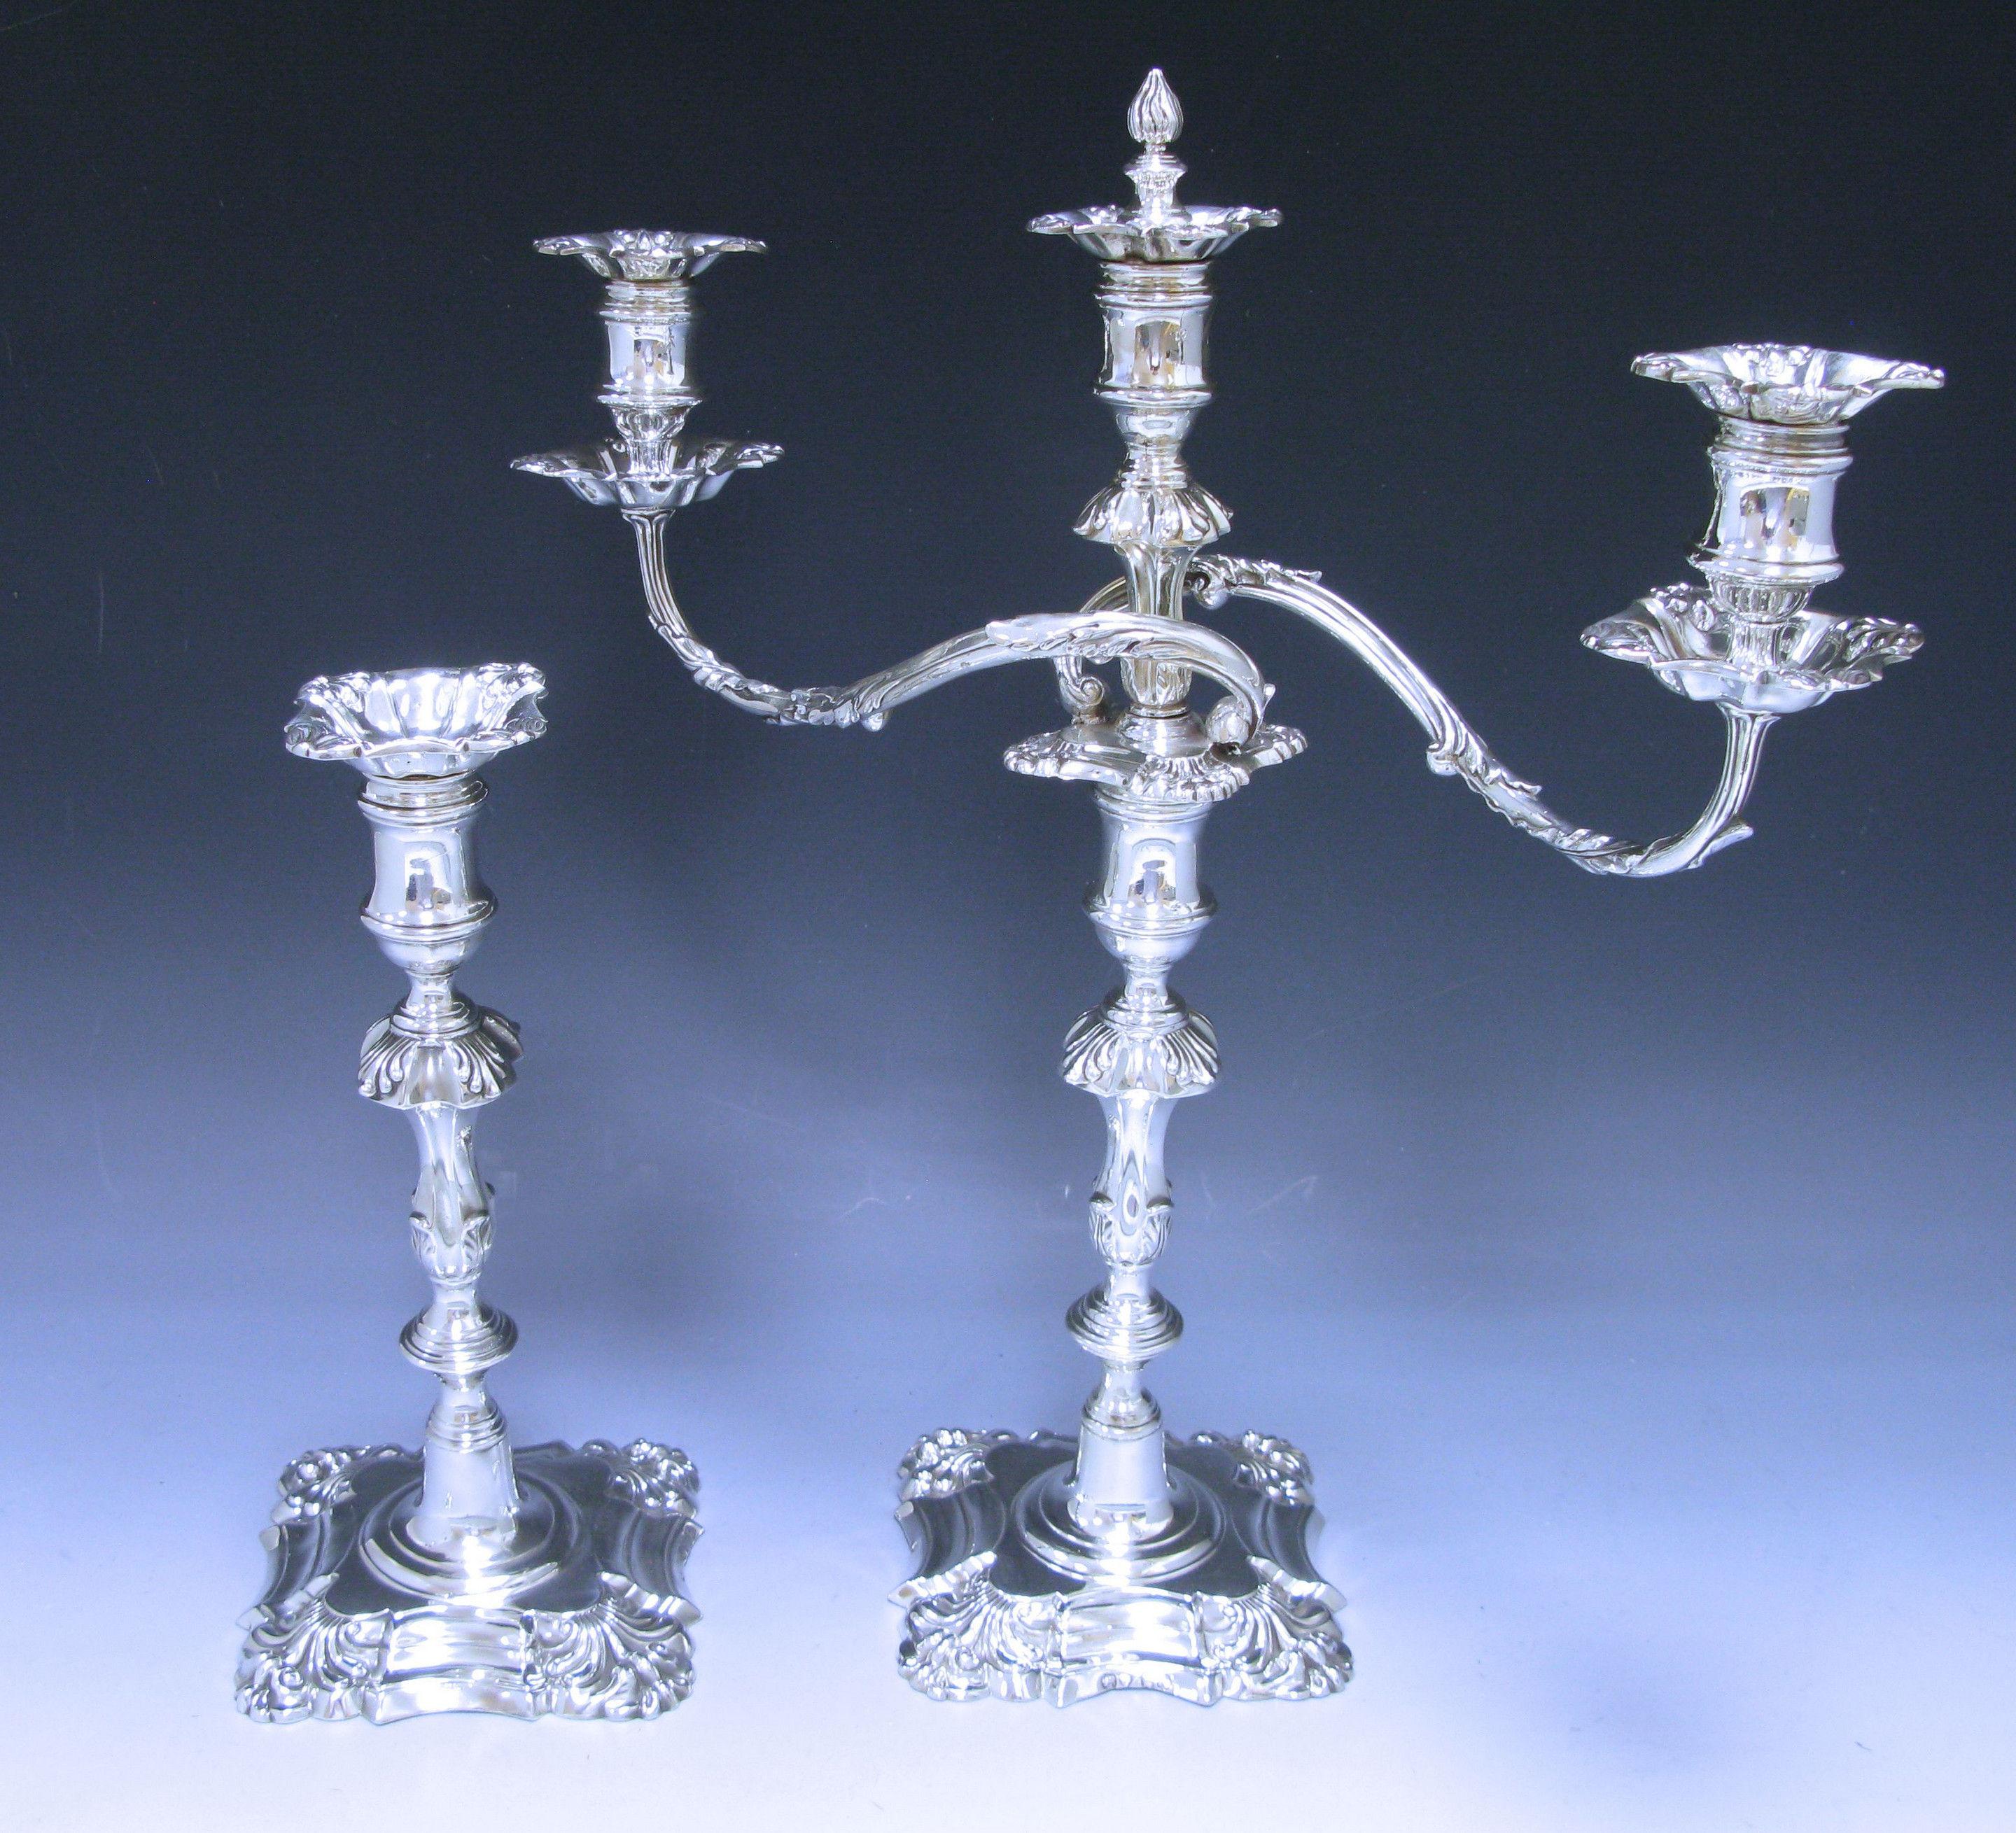 19th Century Pair of George iv Antique Silver Three-Light Candelabra For Sale